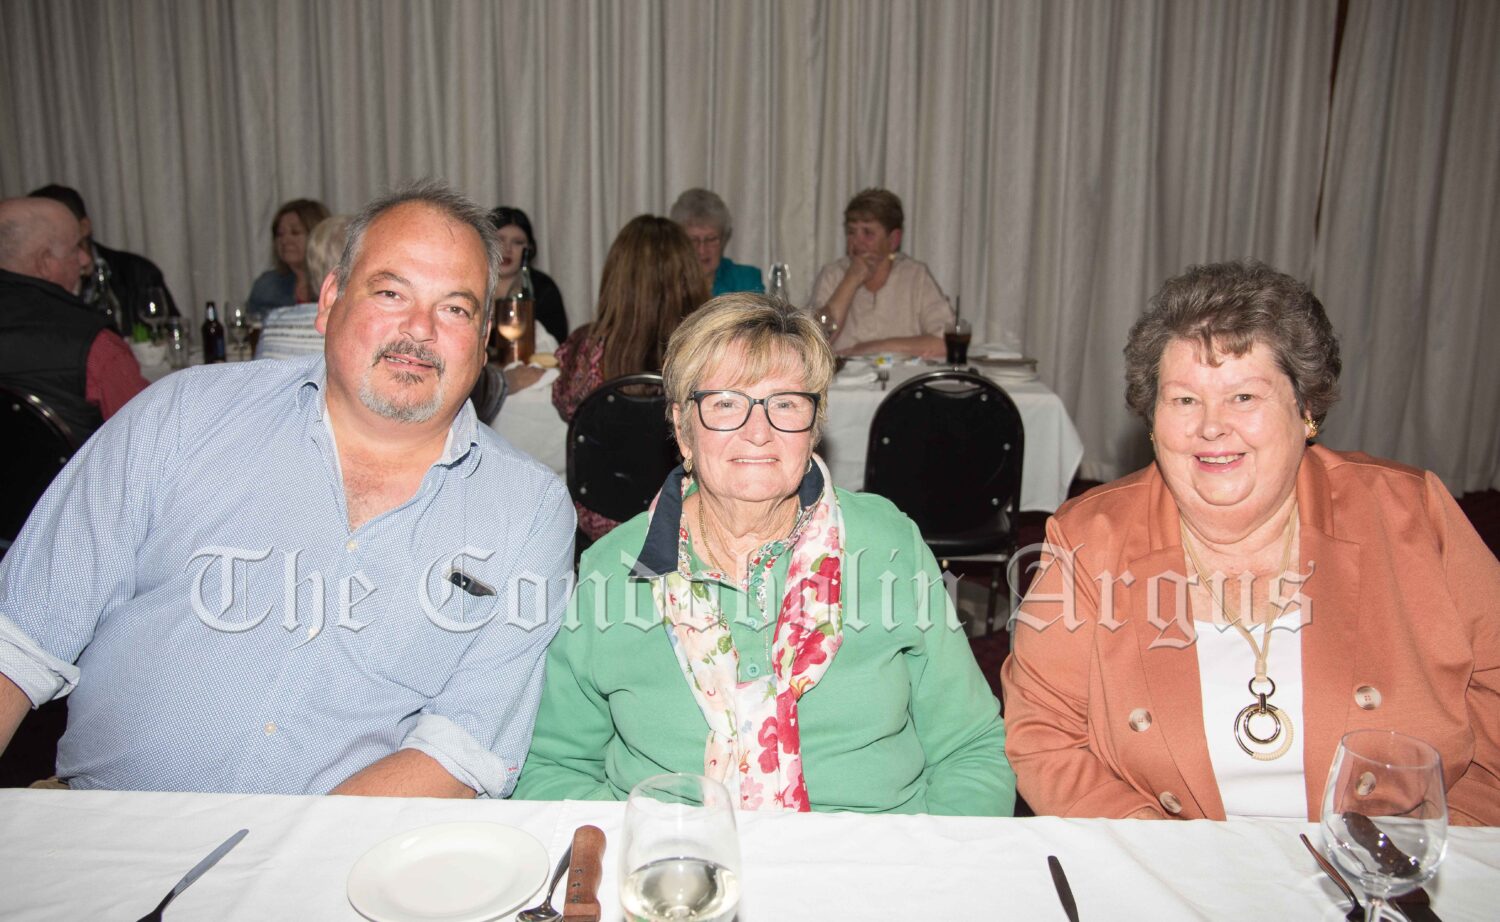 ABOVE: Andrew Chamen, Neryl Stains and Bev Laneyrie. Image Credit: Kathy Parnaby.